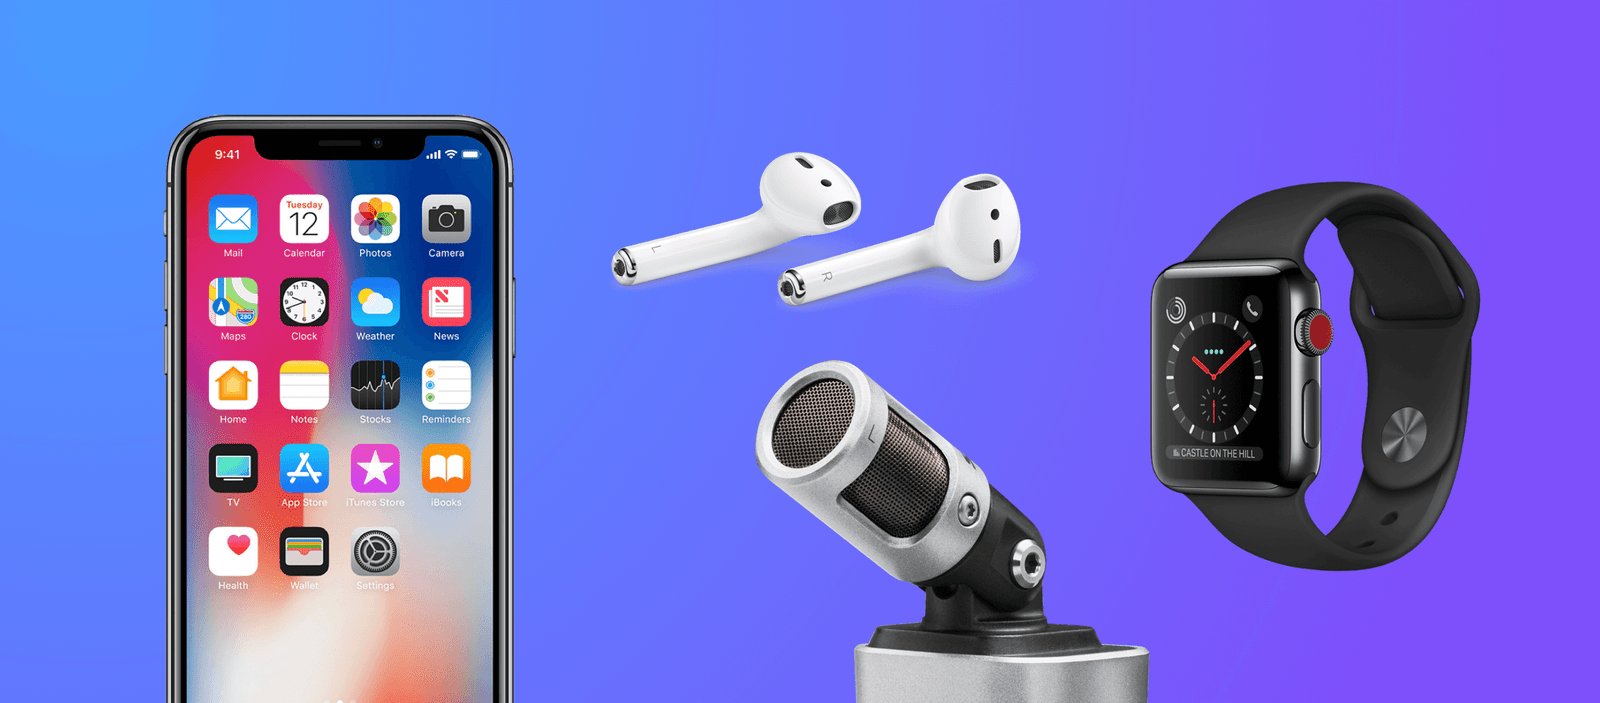 iphone x-airpods-mic-apple watch